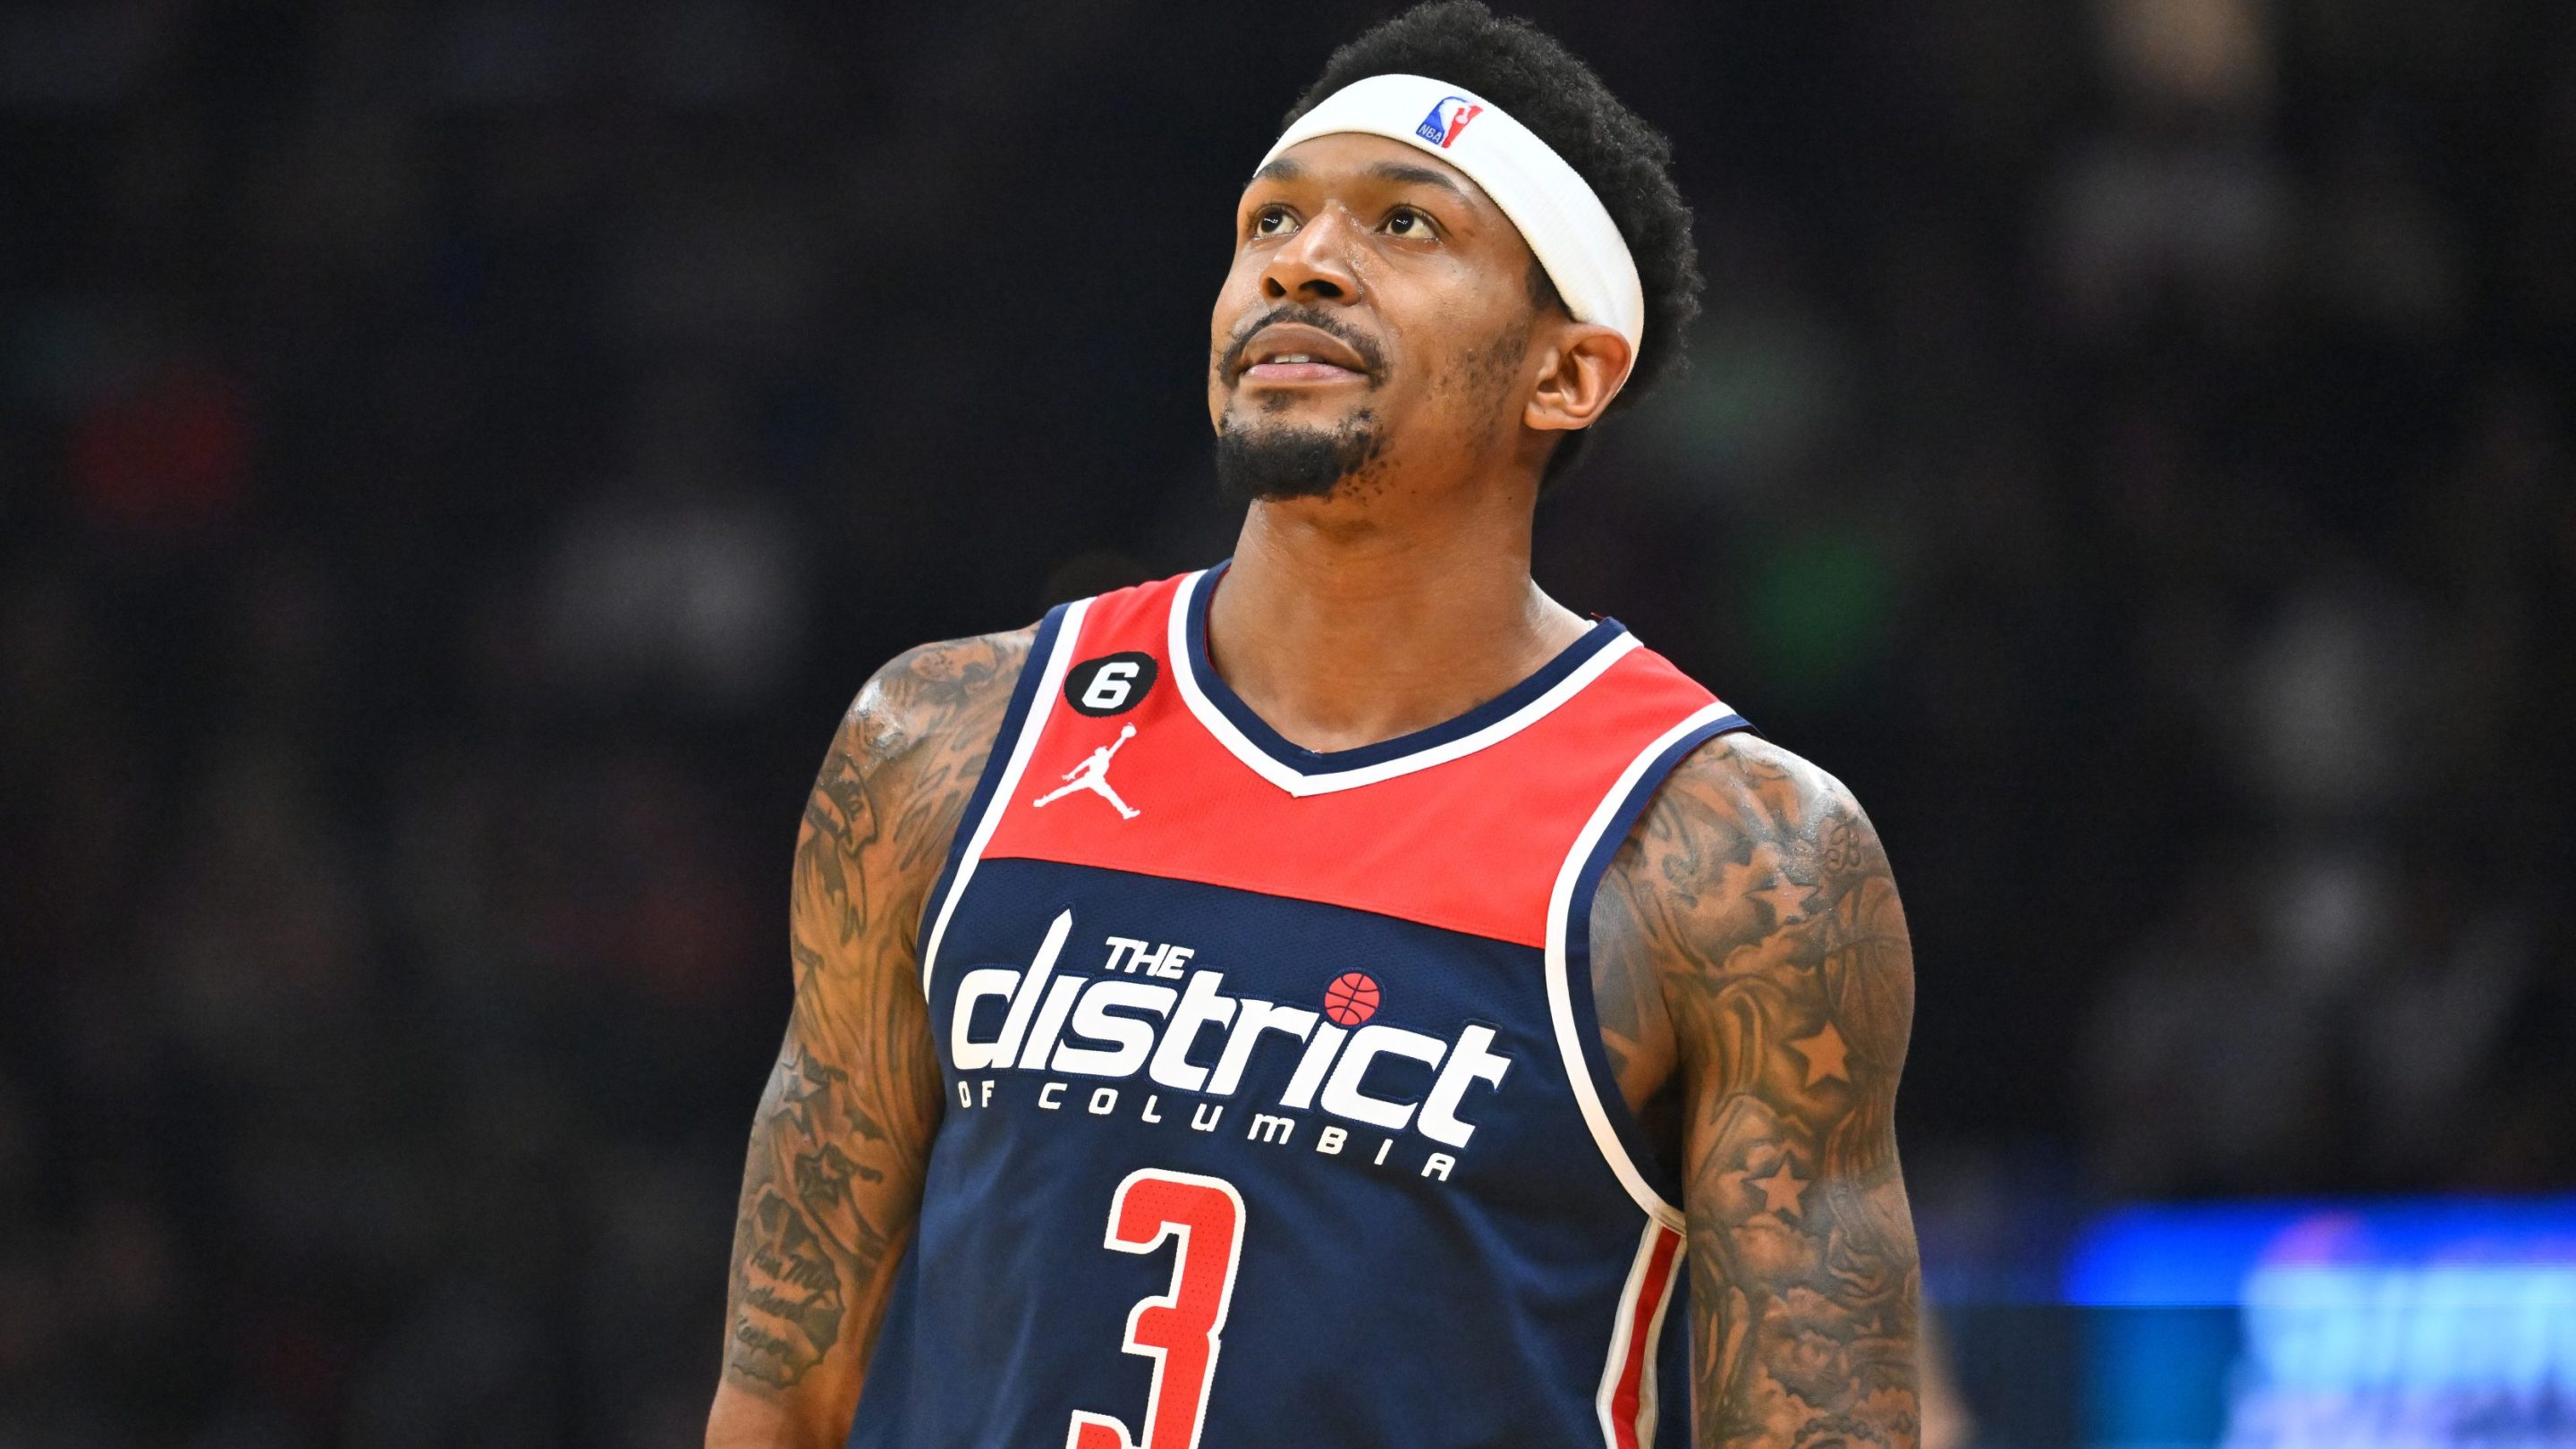 Bradley Beal #3 of the Washington Wizards watches during the second quarter against the Cleveland Cavaliers at Rocket Mortgage Fieldhouse on March 17, 2023.